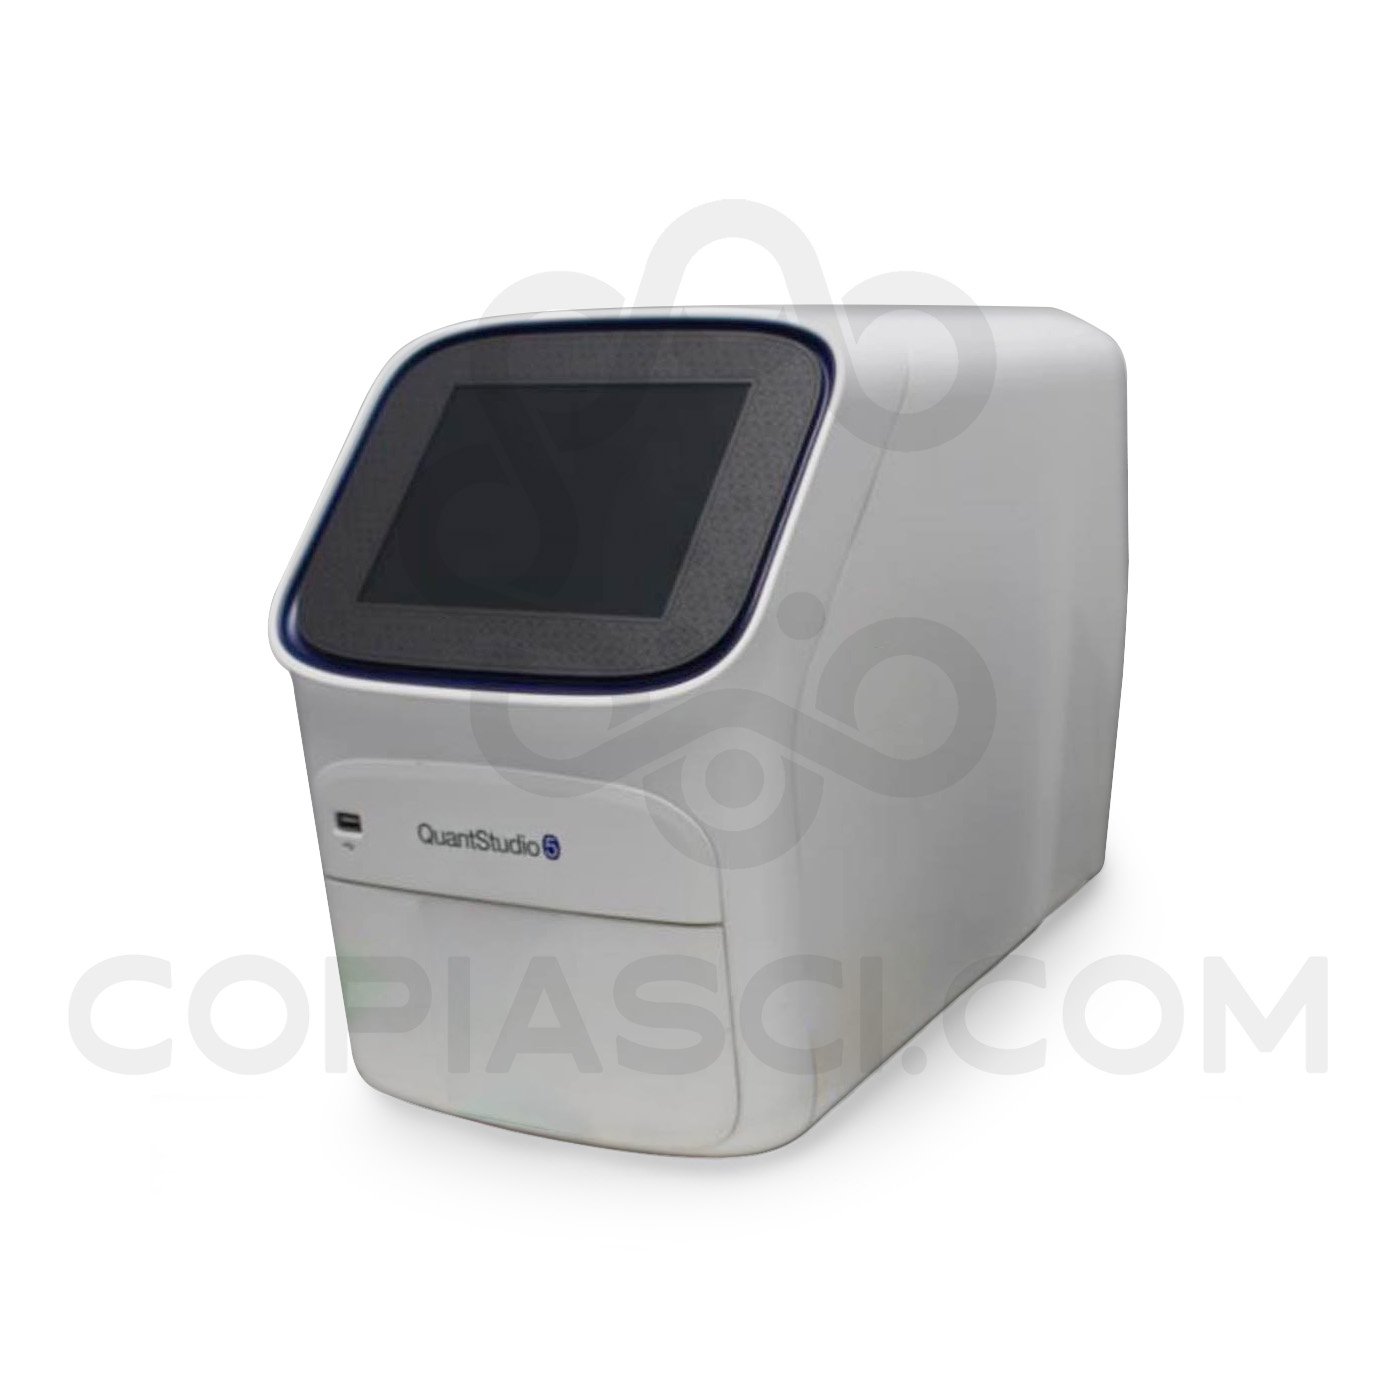 Applied Biosystems / MDS Sciex Real-Time PCR Quantstudio 5 96-Well